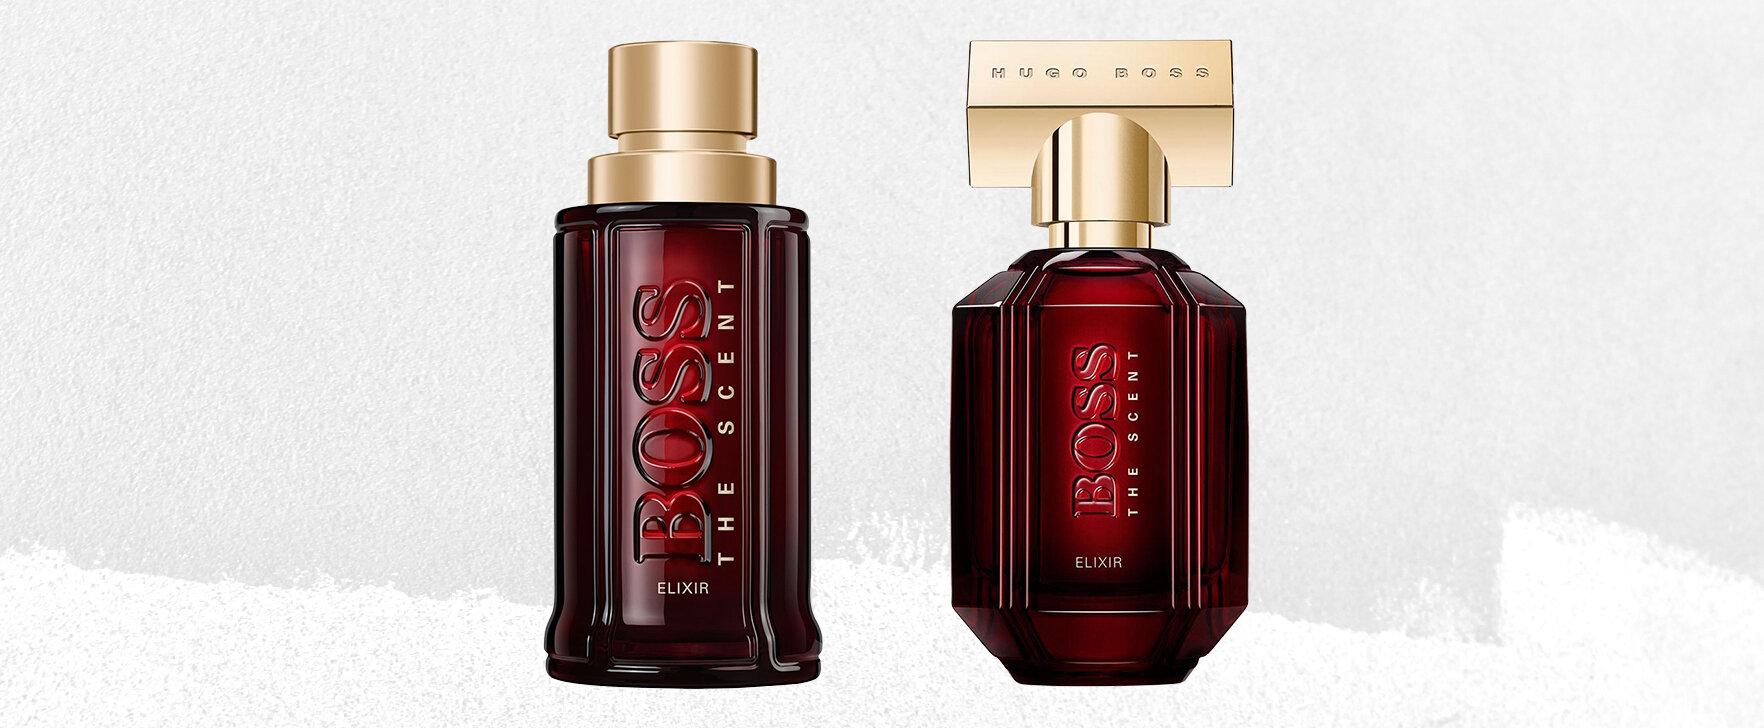 Intense Sensuality: "The Scent Elixir for Her" and "The Scent Elixir for Him" by Hugo Boss